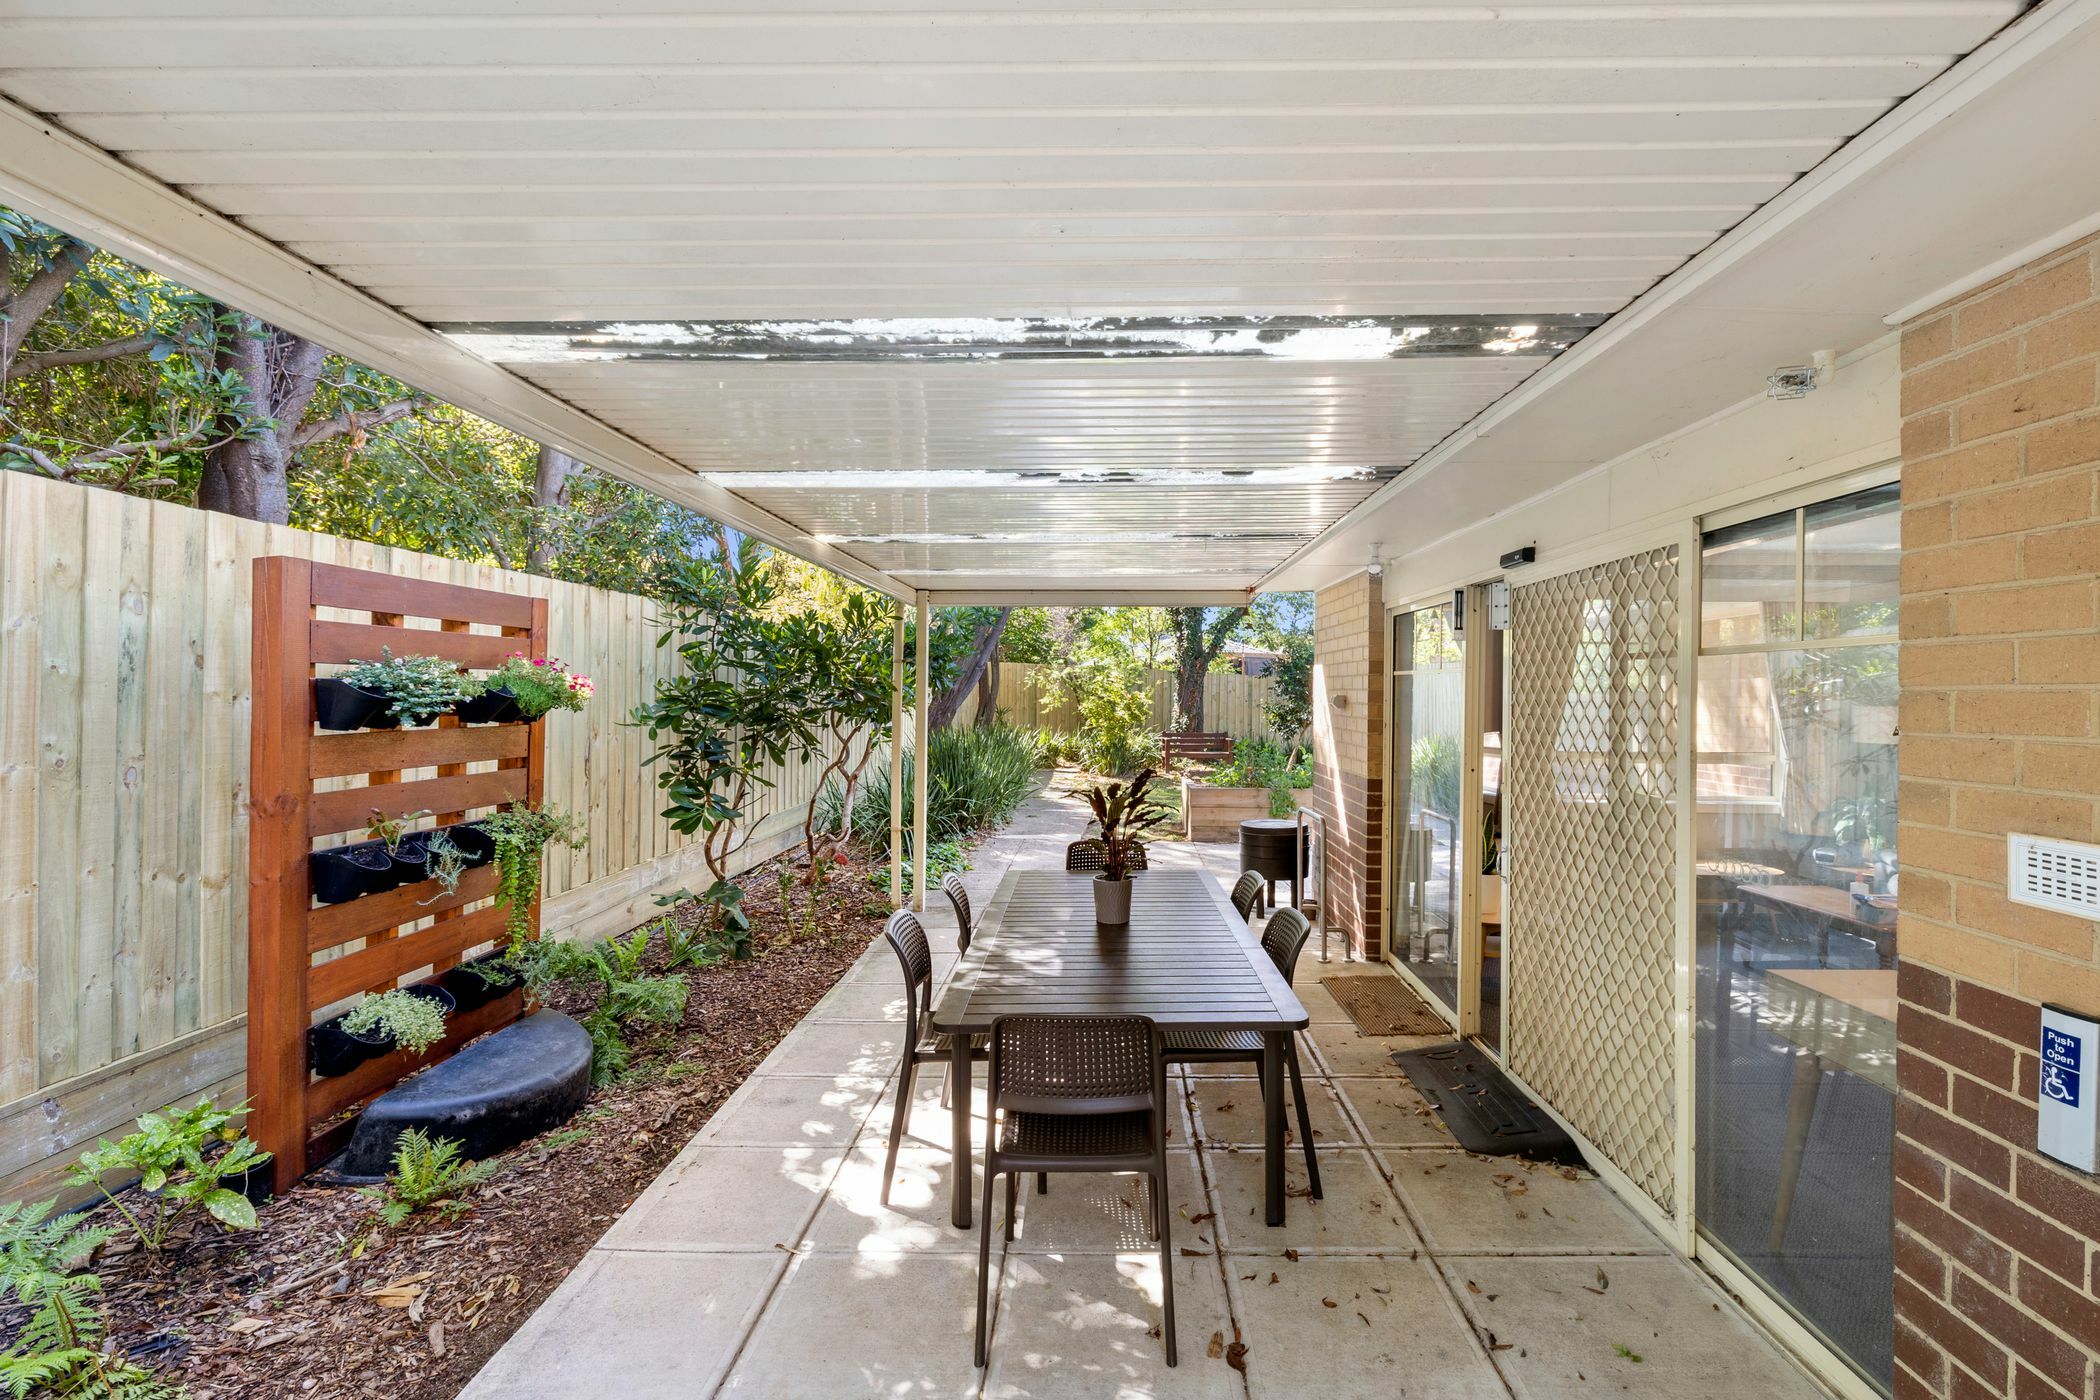 Pergola with a timber vertical garden and outdoor seating